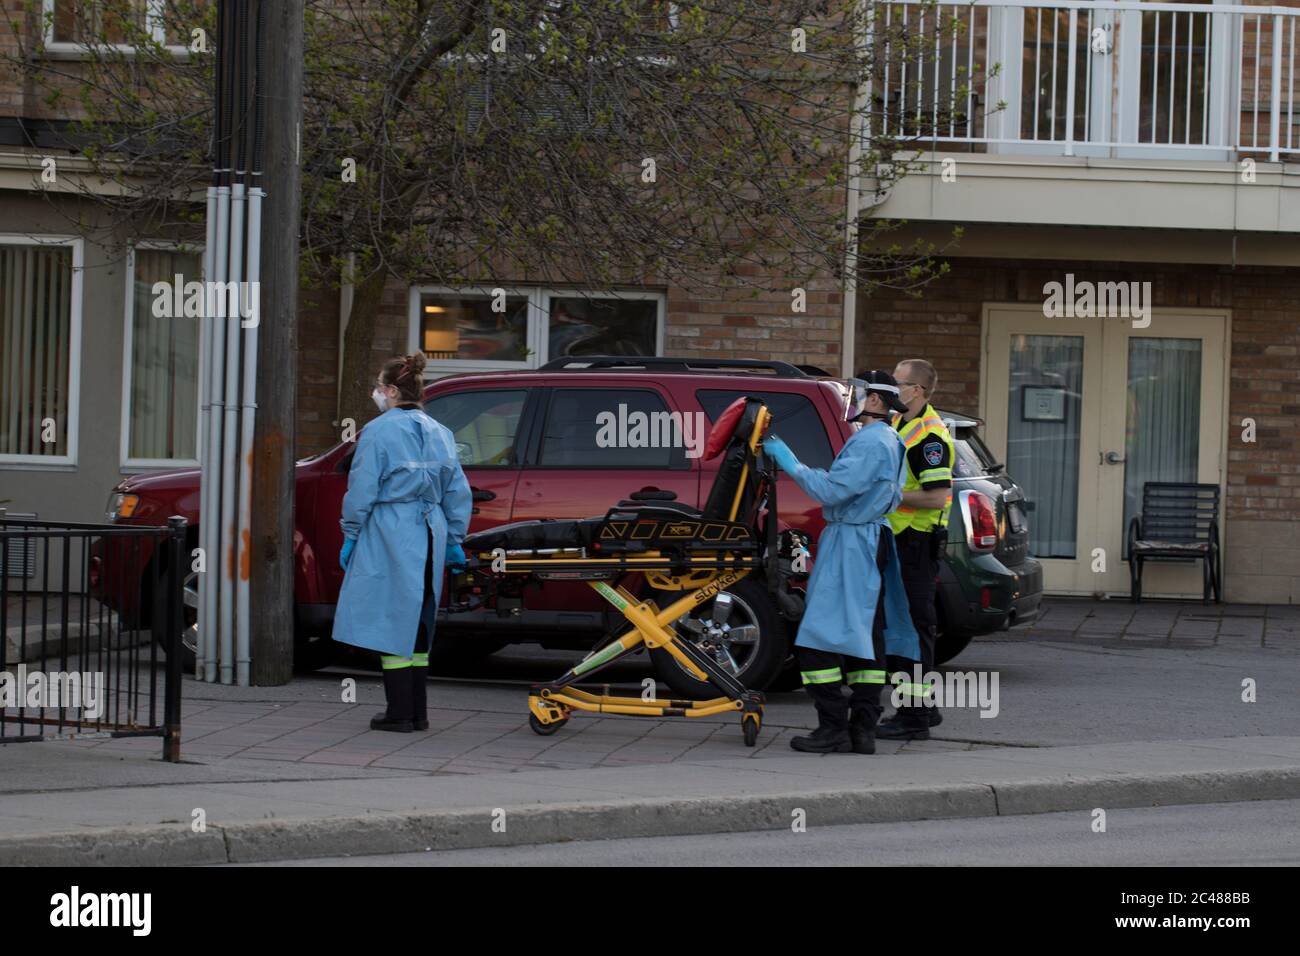 Stretcher taken out of ambulance by paramedics wearing personal protective gear and medical gowns. Medical gurney ready to transport sick patients. Stock Photo